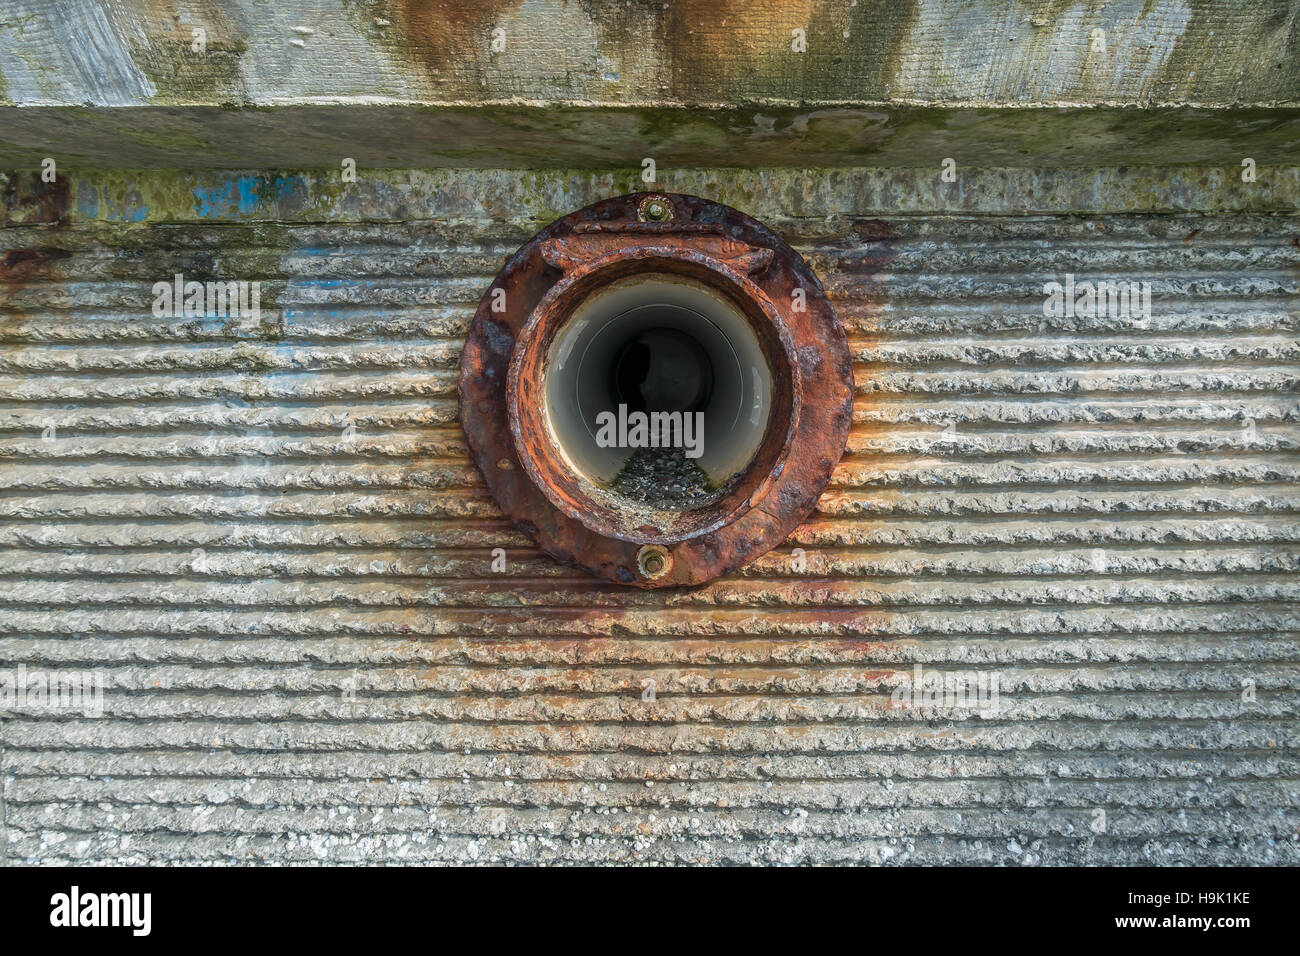 A view of a sewer outlet in a wall at Redondo Beach, Washington. Stock Photo